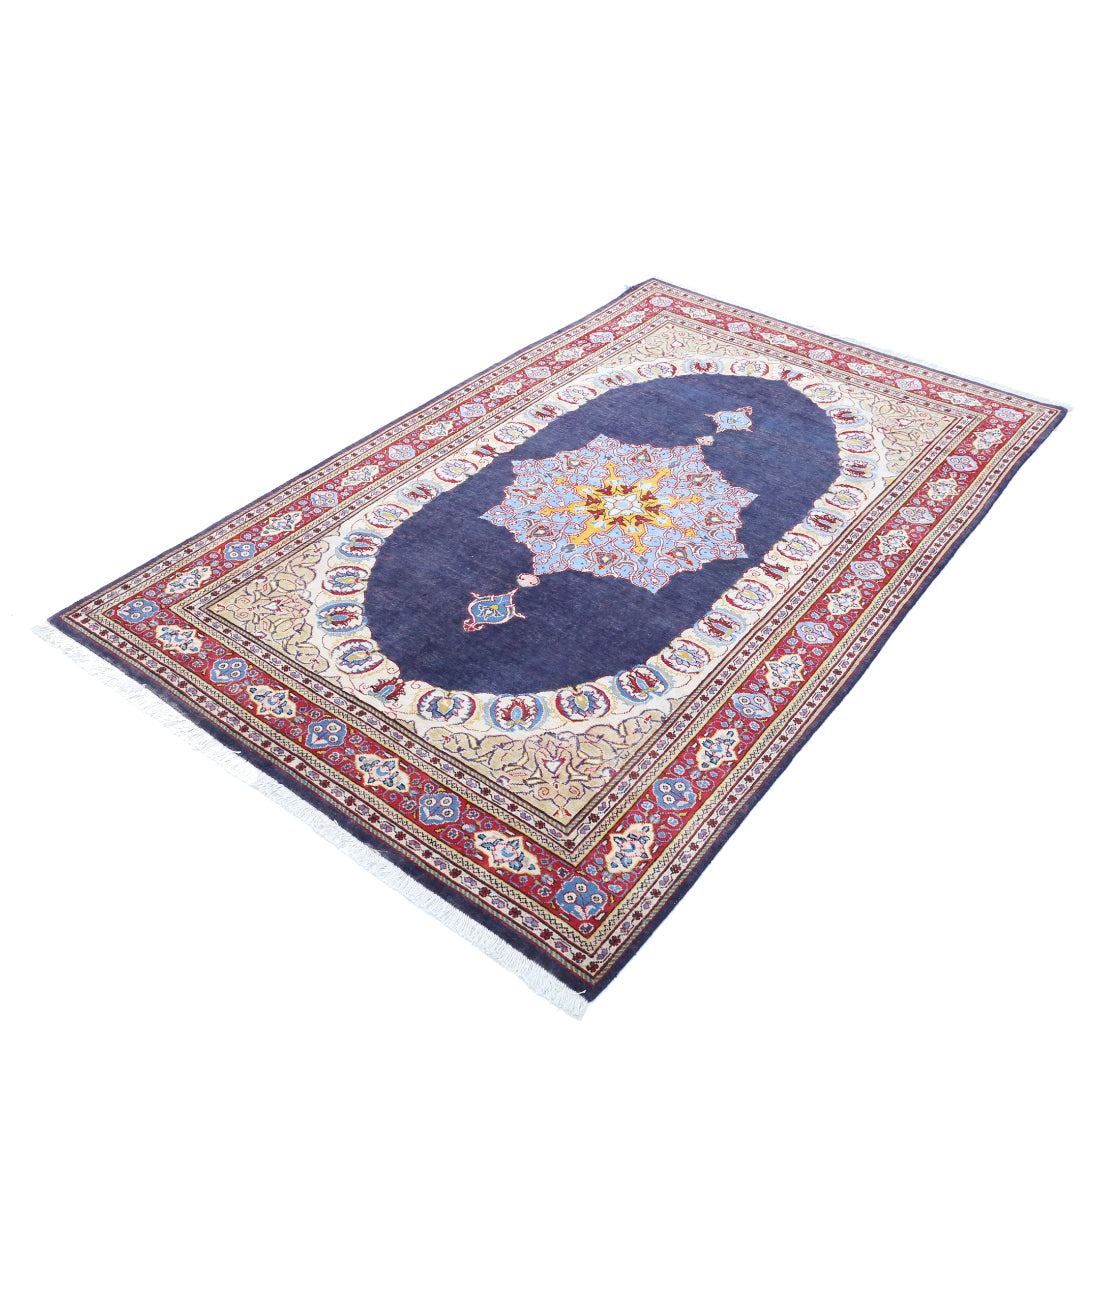 Hand Knotted Persian Kashan Wool Rug - 4'4'' x 7'3'' 4'4'' x 7'3'' (130 X 218) / Blue / Red